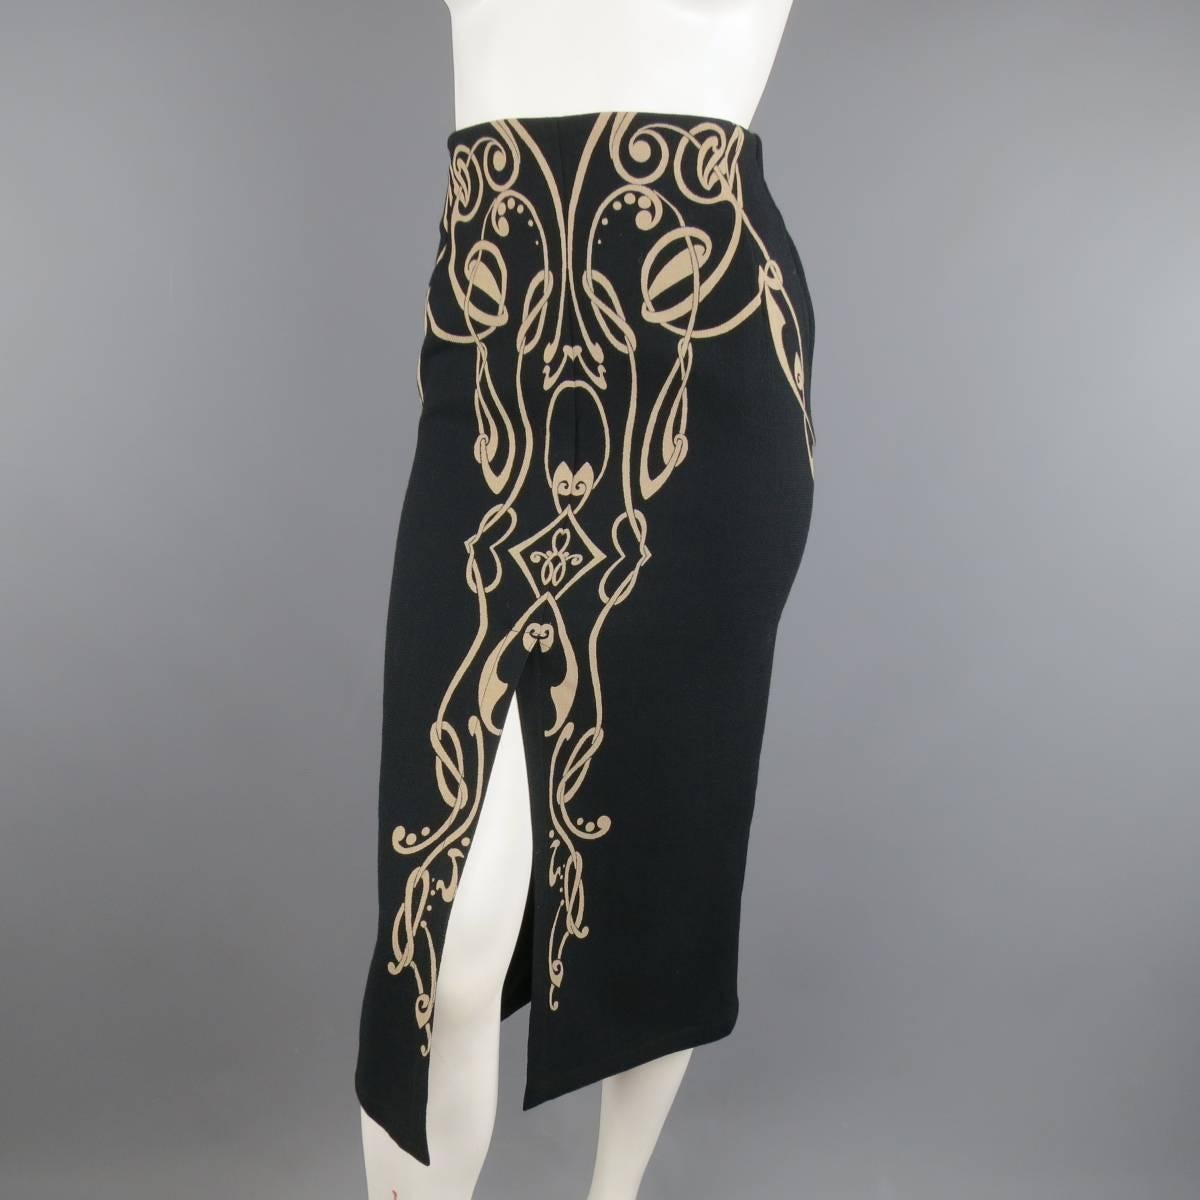 Vintage 1980's GIANNI VERSACE pencil skirt in a black wool crepe featuring a high rise, midi length, front slit, and beige , symmetrical art deco pattern on front. Made in Italy.
 
Excellent Pre-Owned Condition.
Marked: IT 42
 
Measurements:
